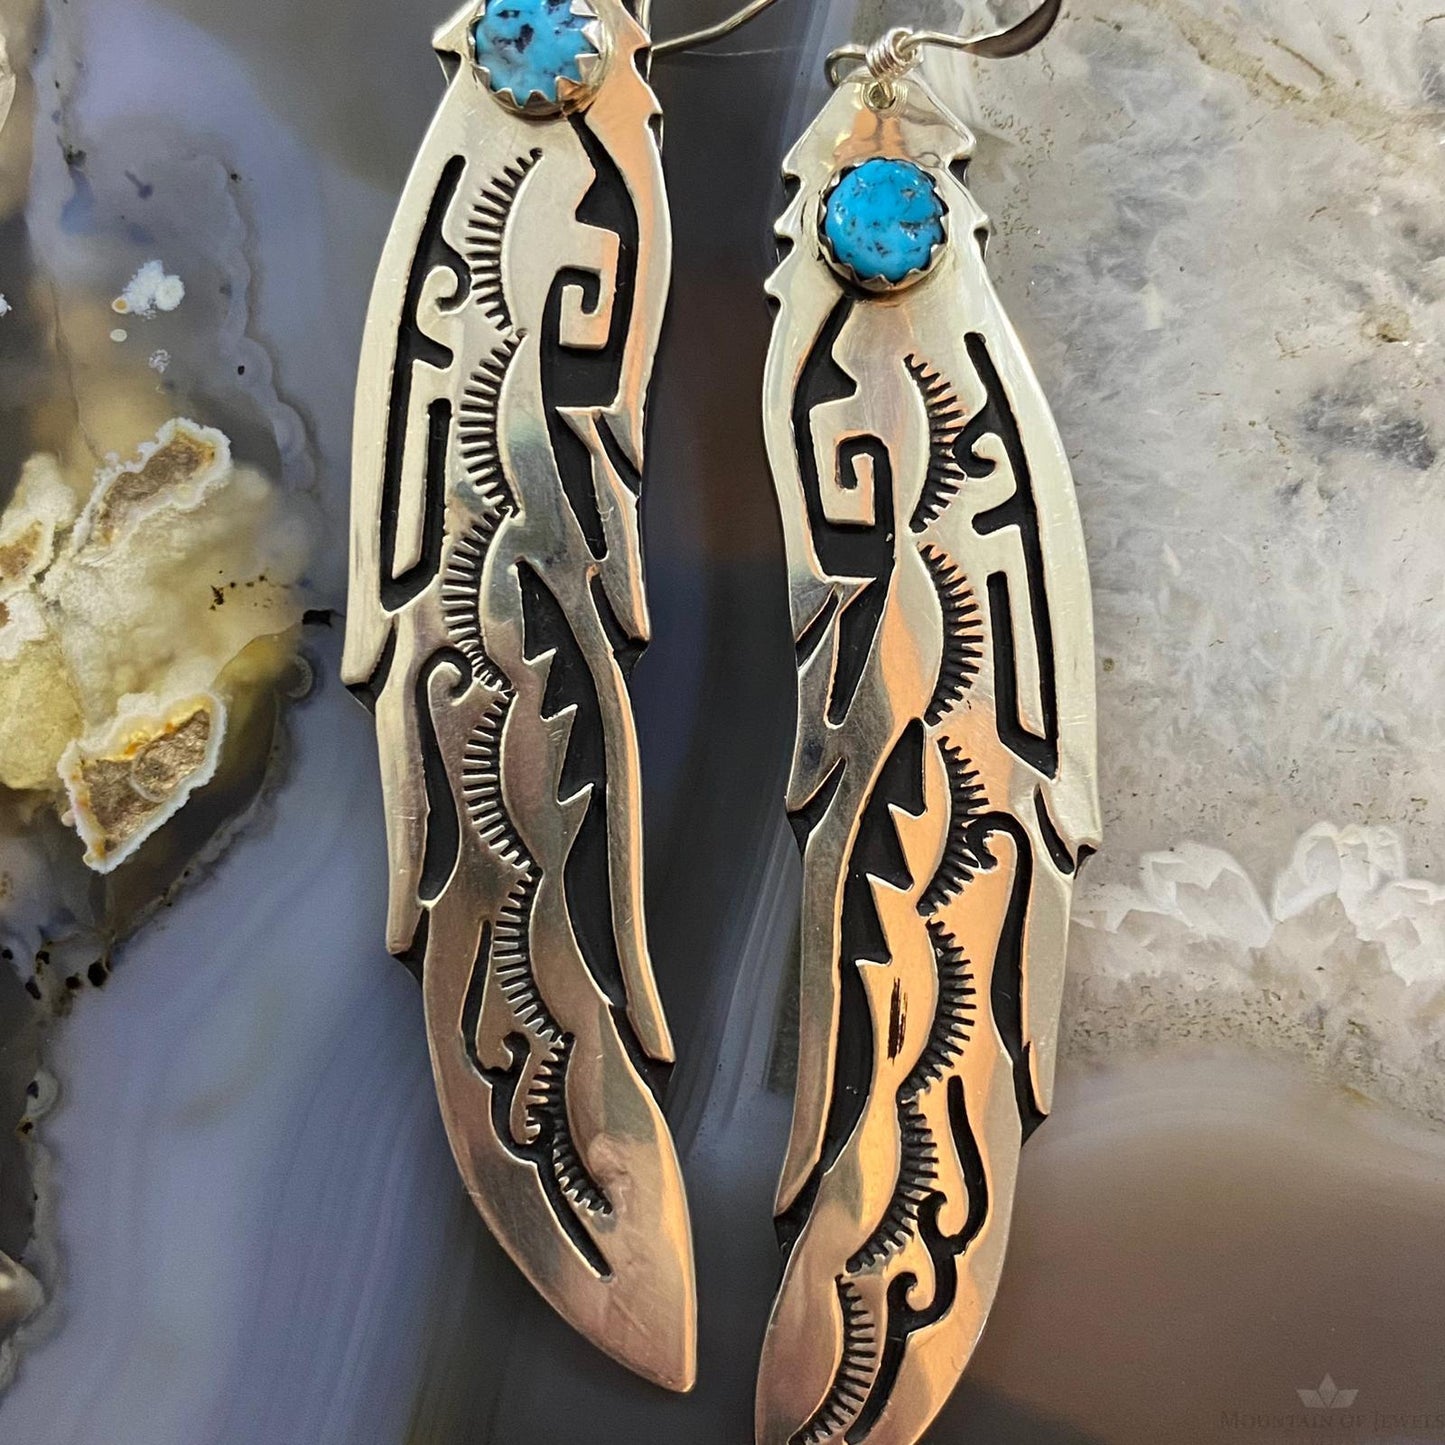 Tommy & Rosita Singer Native American Overlay Feather with Turquoise Sterling Silver Dangle Earrings For Women